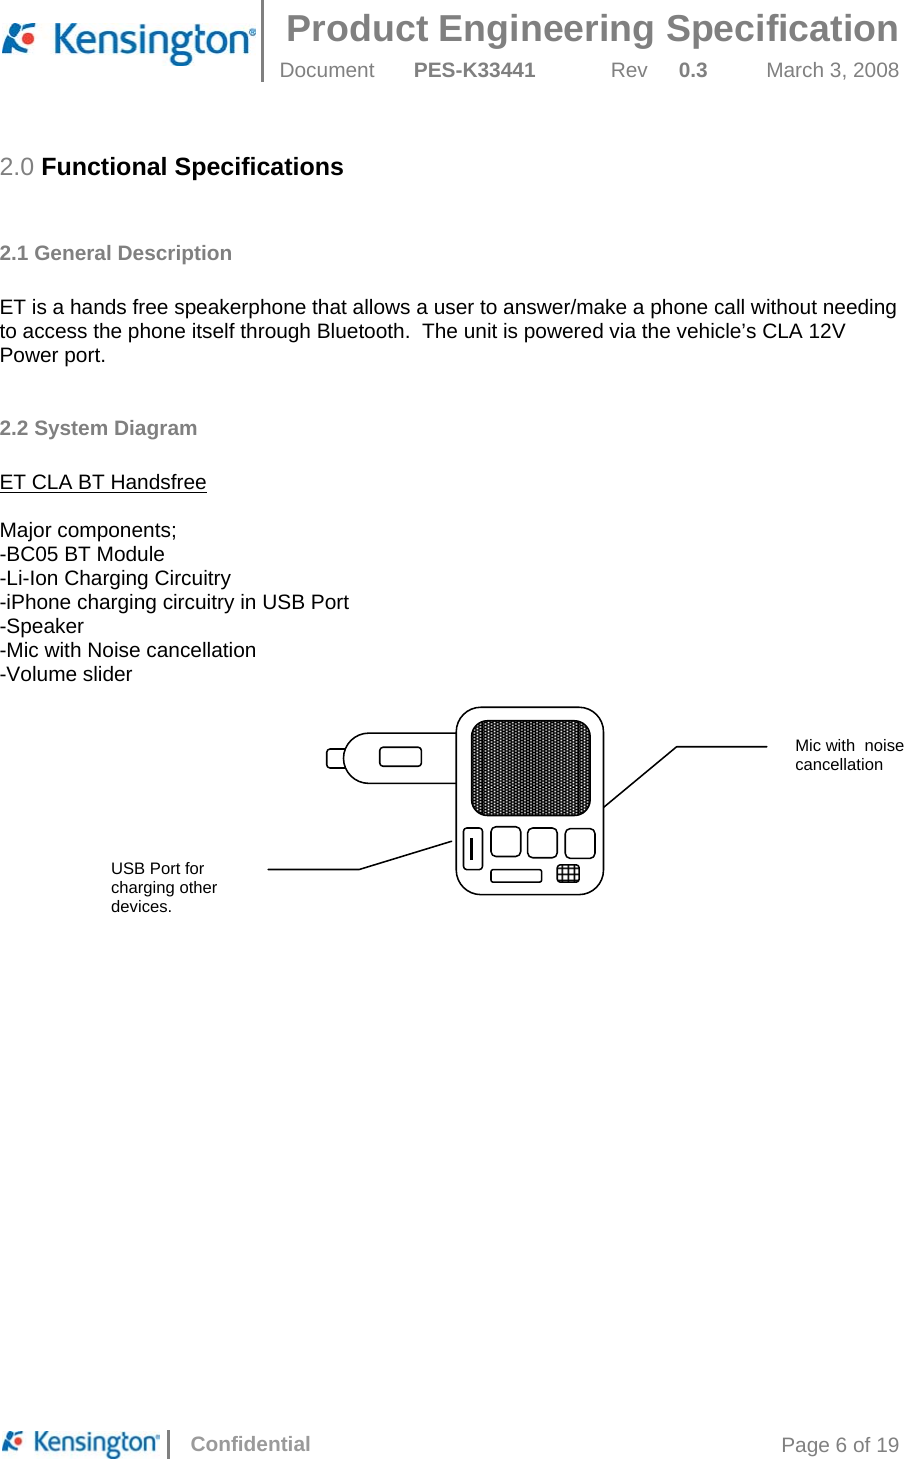  Product Engineering Specification Document  PES-K33441  Rev  0.3  March 3, 2008      Confidential  Page 6 of 19 2.0 Functional Specifications  2.1 General Description  ET is a hands free speakerphone that allows a user to answer/make a phone call without needing to access the phone itself through Bluetooth.  The unit is powered via the vehicle’s CLA 12V Power port.  2.2 System Diagram  ET CLA BT Handsfree  Major components; -BC05 BT Module -Li-Ion Charging Circuitry -iPhone charging circuitry in USB Port -Speaker -Mic with Noise cancellation -Volume slider     Mic with  noise cancellation  USB Port for charging other devices. 